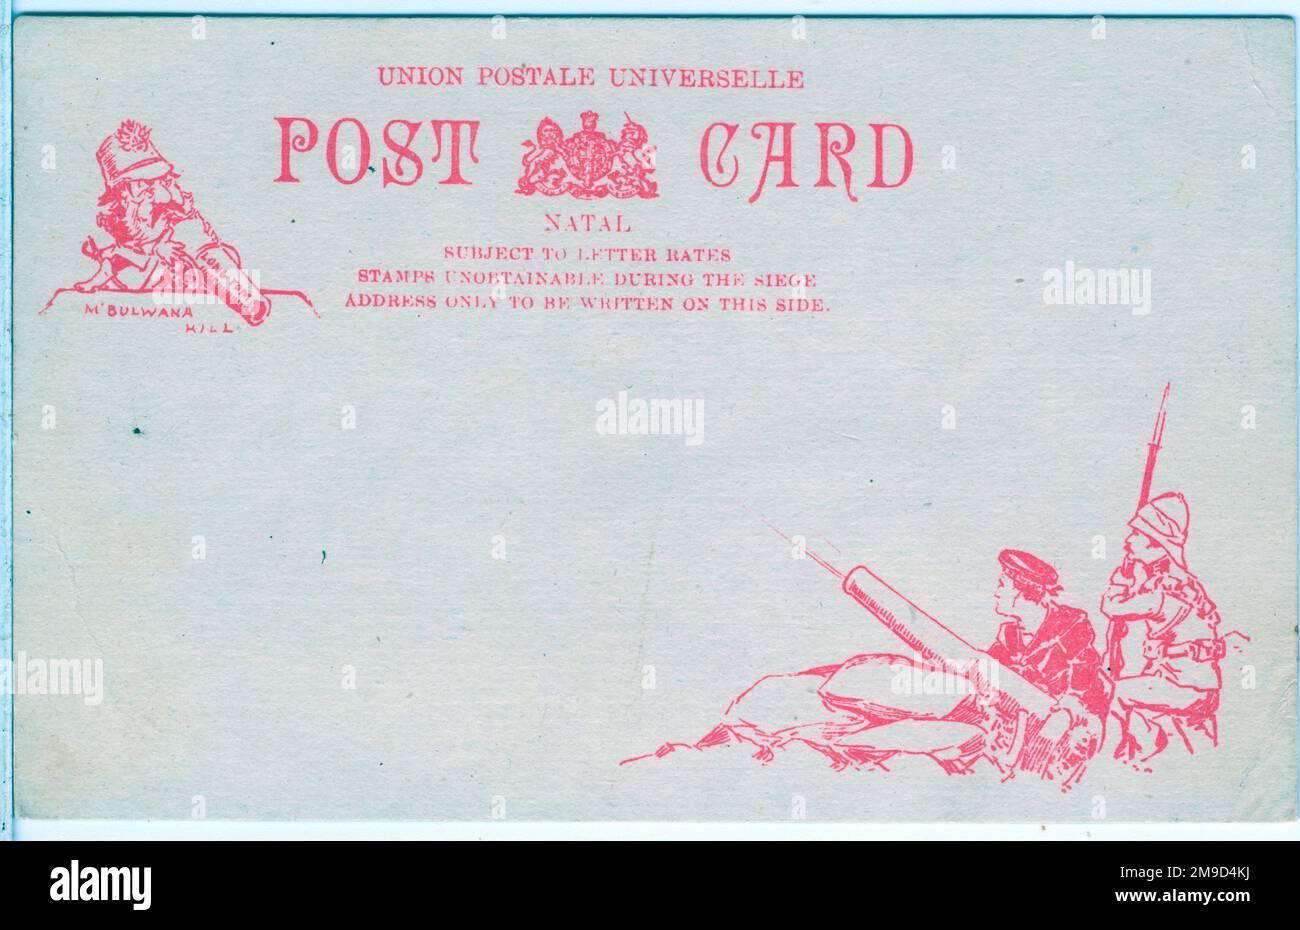 One side of the line-drawn card shows a Boer soldier,  with the Long Tom cannon, looking down from Bulwana Hill at a British soldier and sailor returning fire. On the other side is a simple map of the battlefleld. A printed message on the card says 'Stamps unavailable during the Siege'. Stock Photo